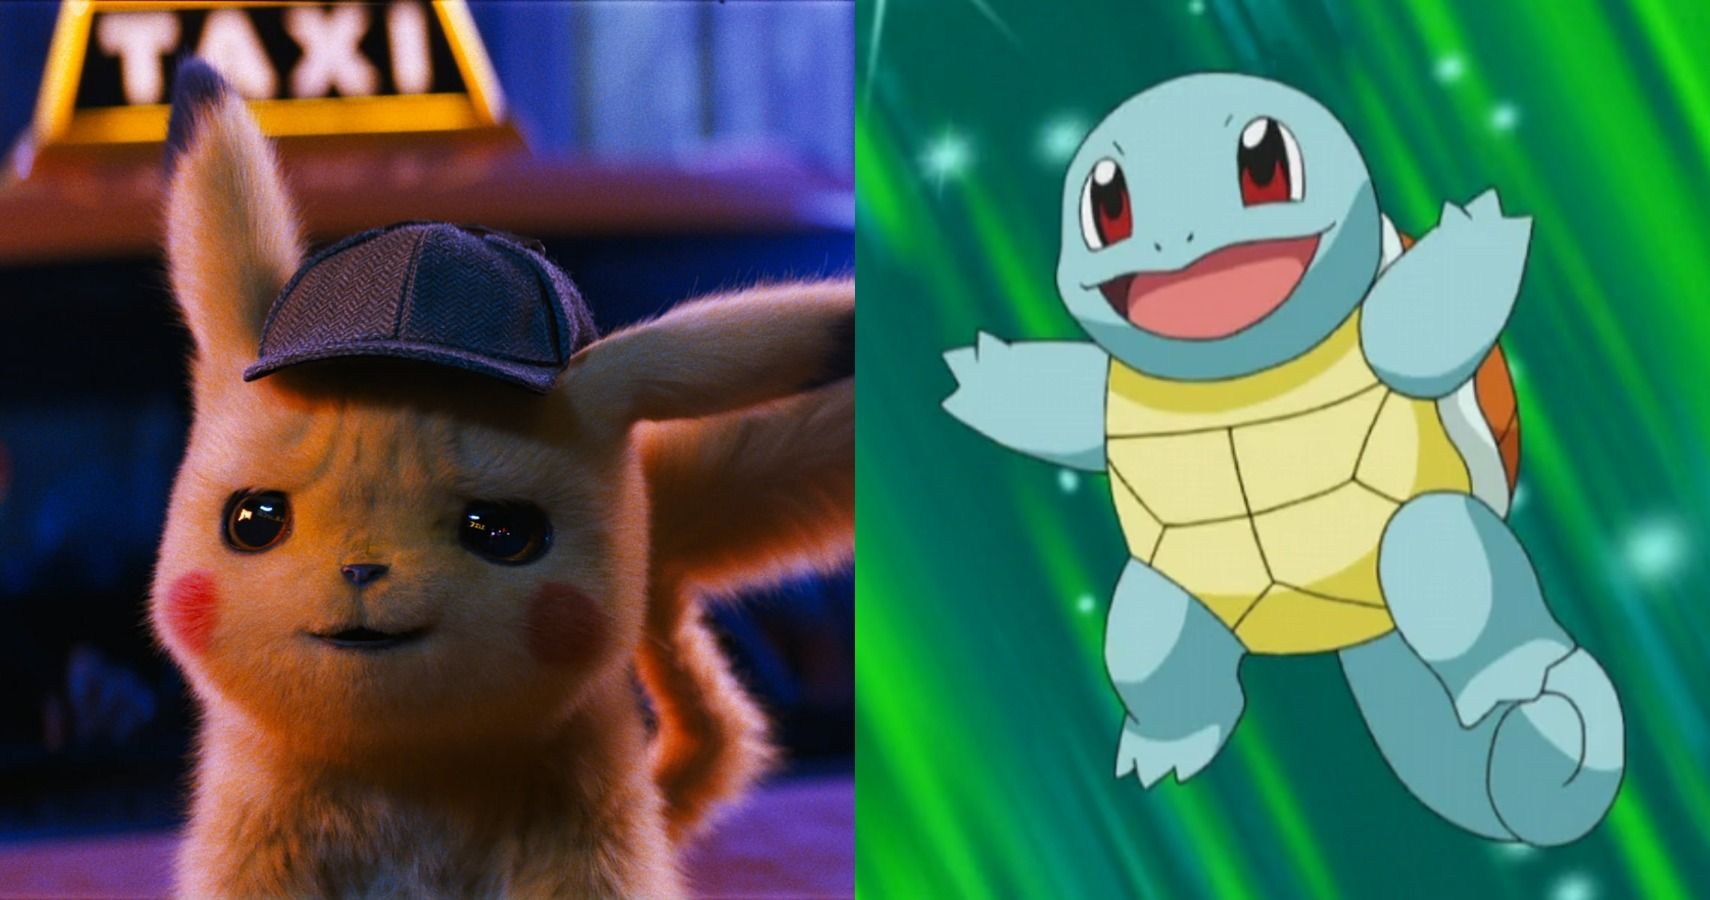 A collage showing the live-action Pikachu of Pokémon Detective Pikachu and Squirtle from the Pokémon anime series